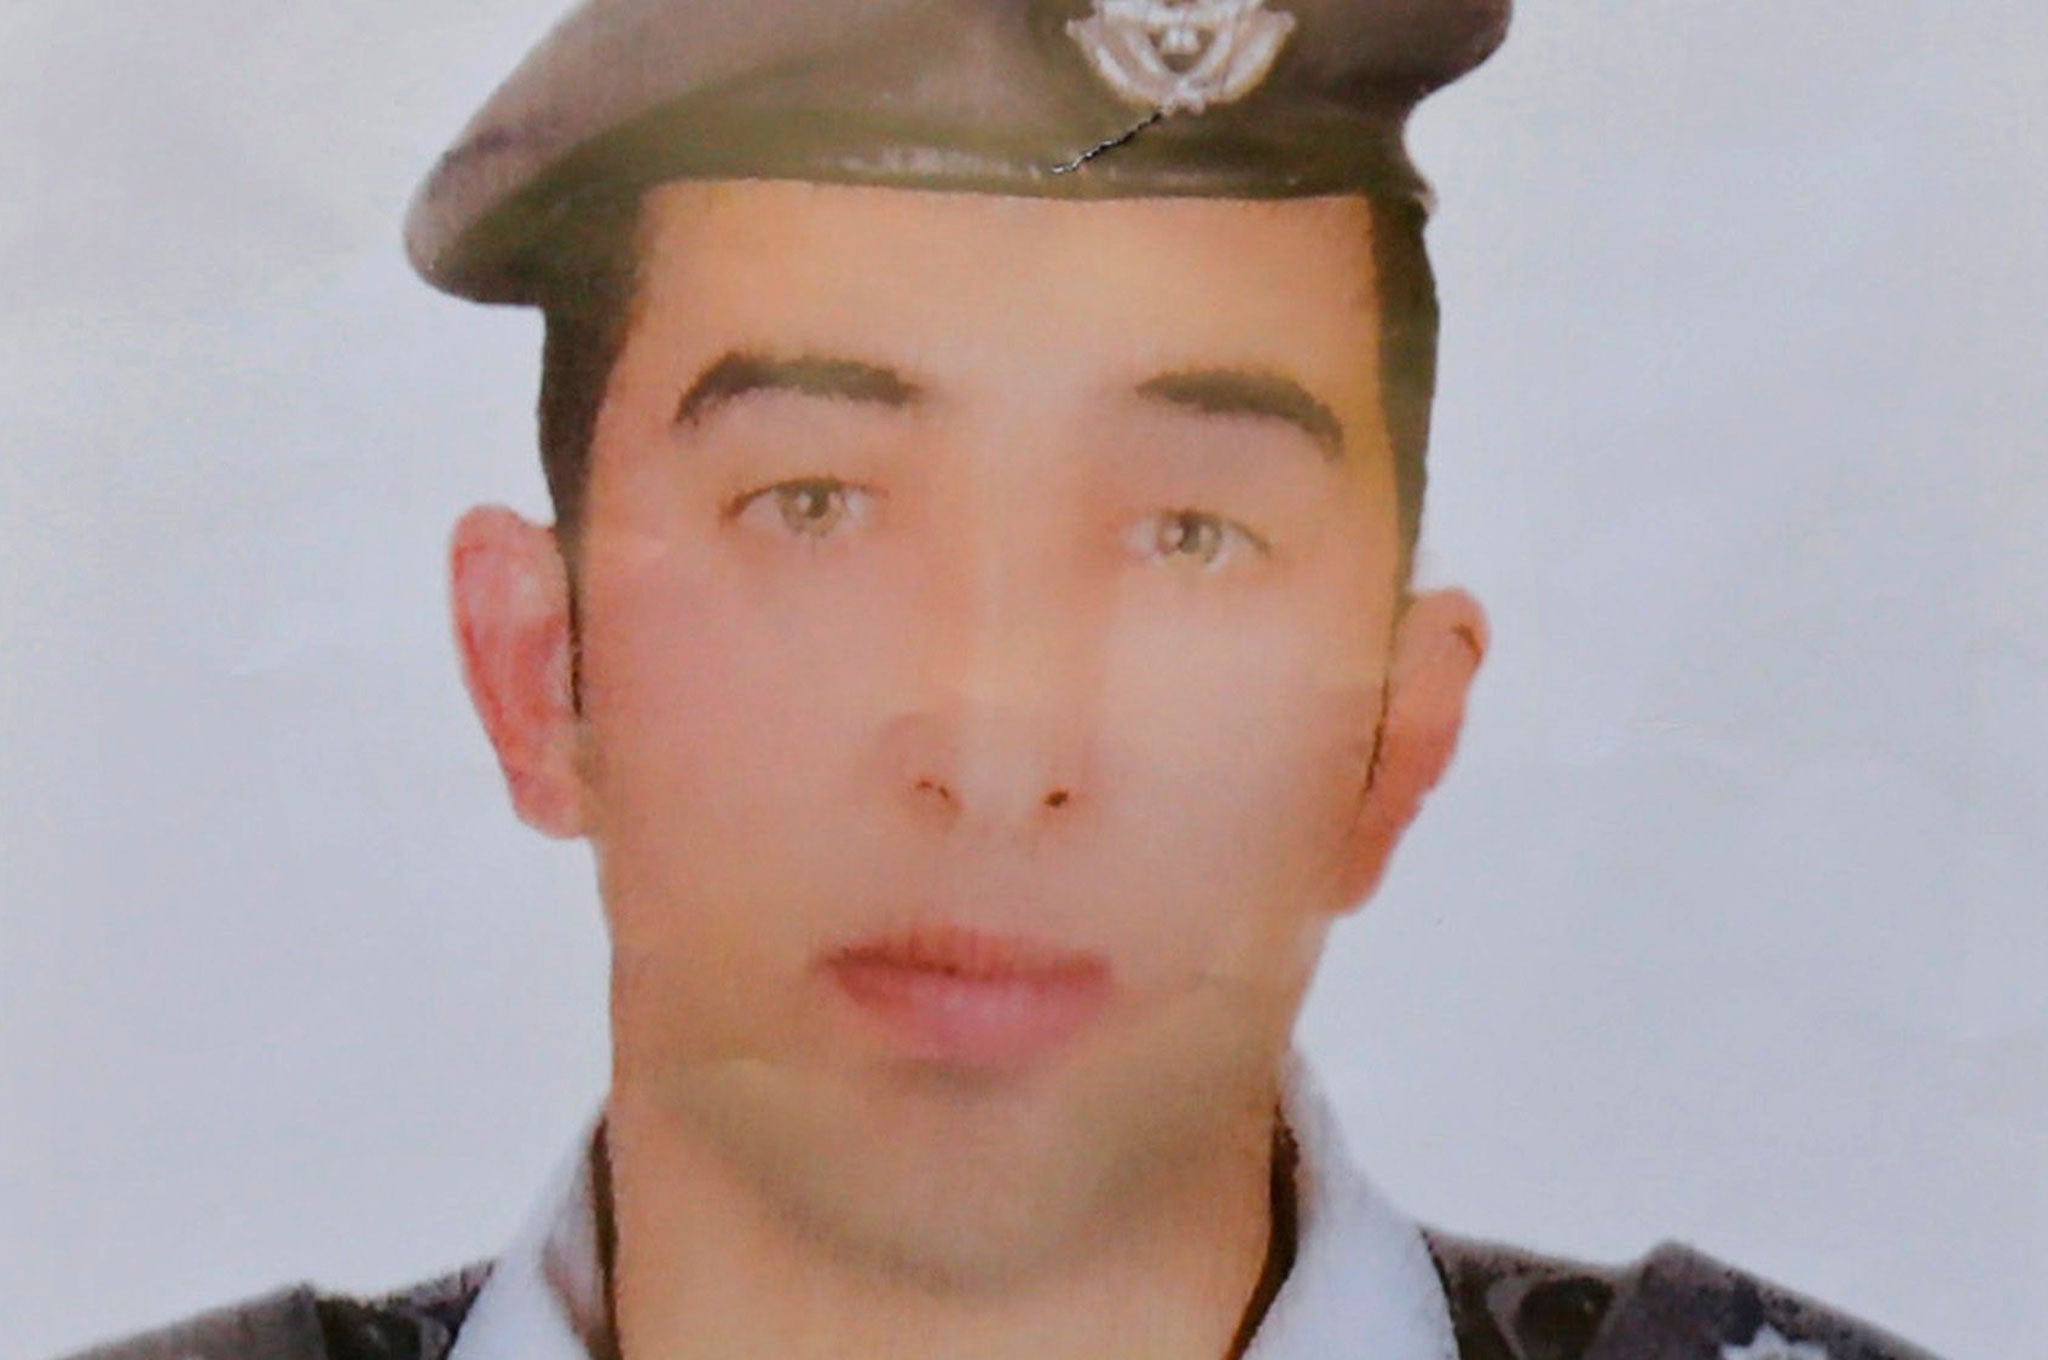 The Independent will not publish images from an Isis video purporting to show Jordanian pilot Muath al-Kasaesbeh being burnt alive